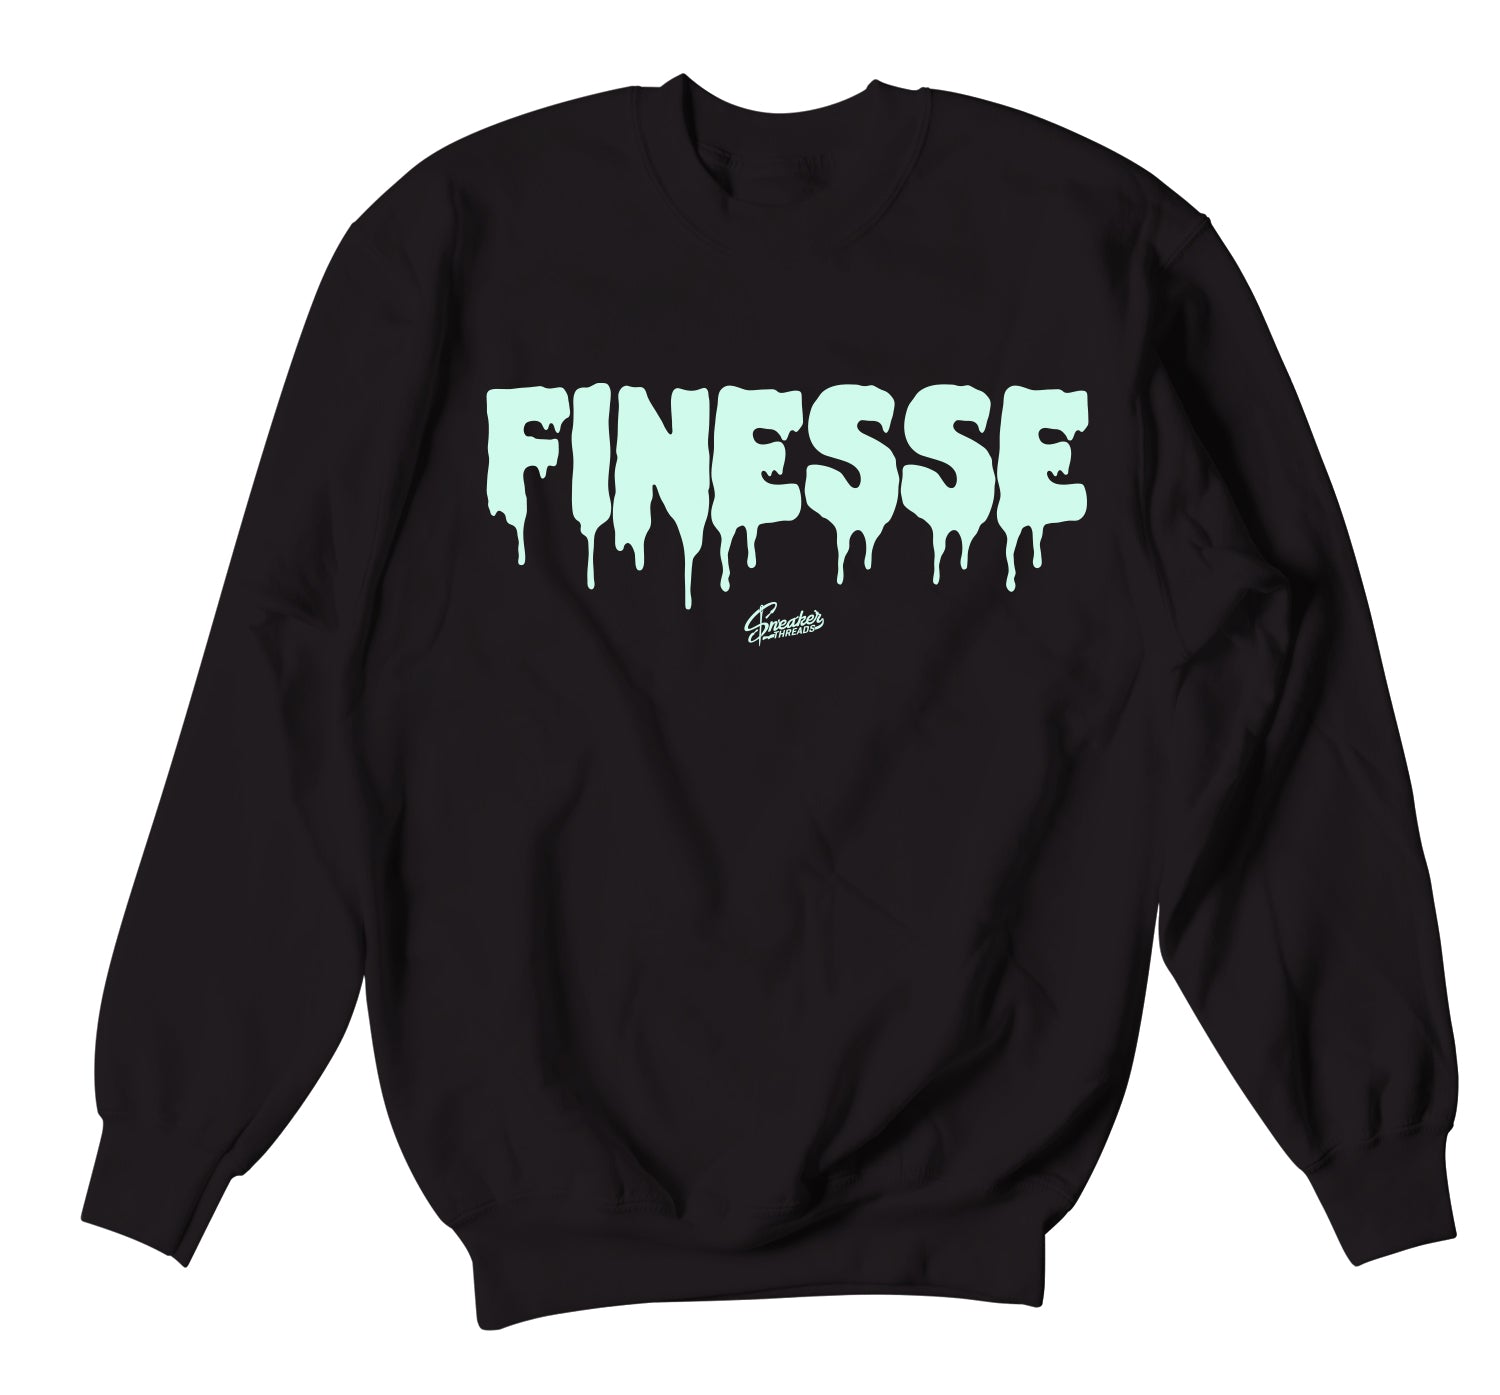 Barely Green All Star Sweater - Finesse - Black